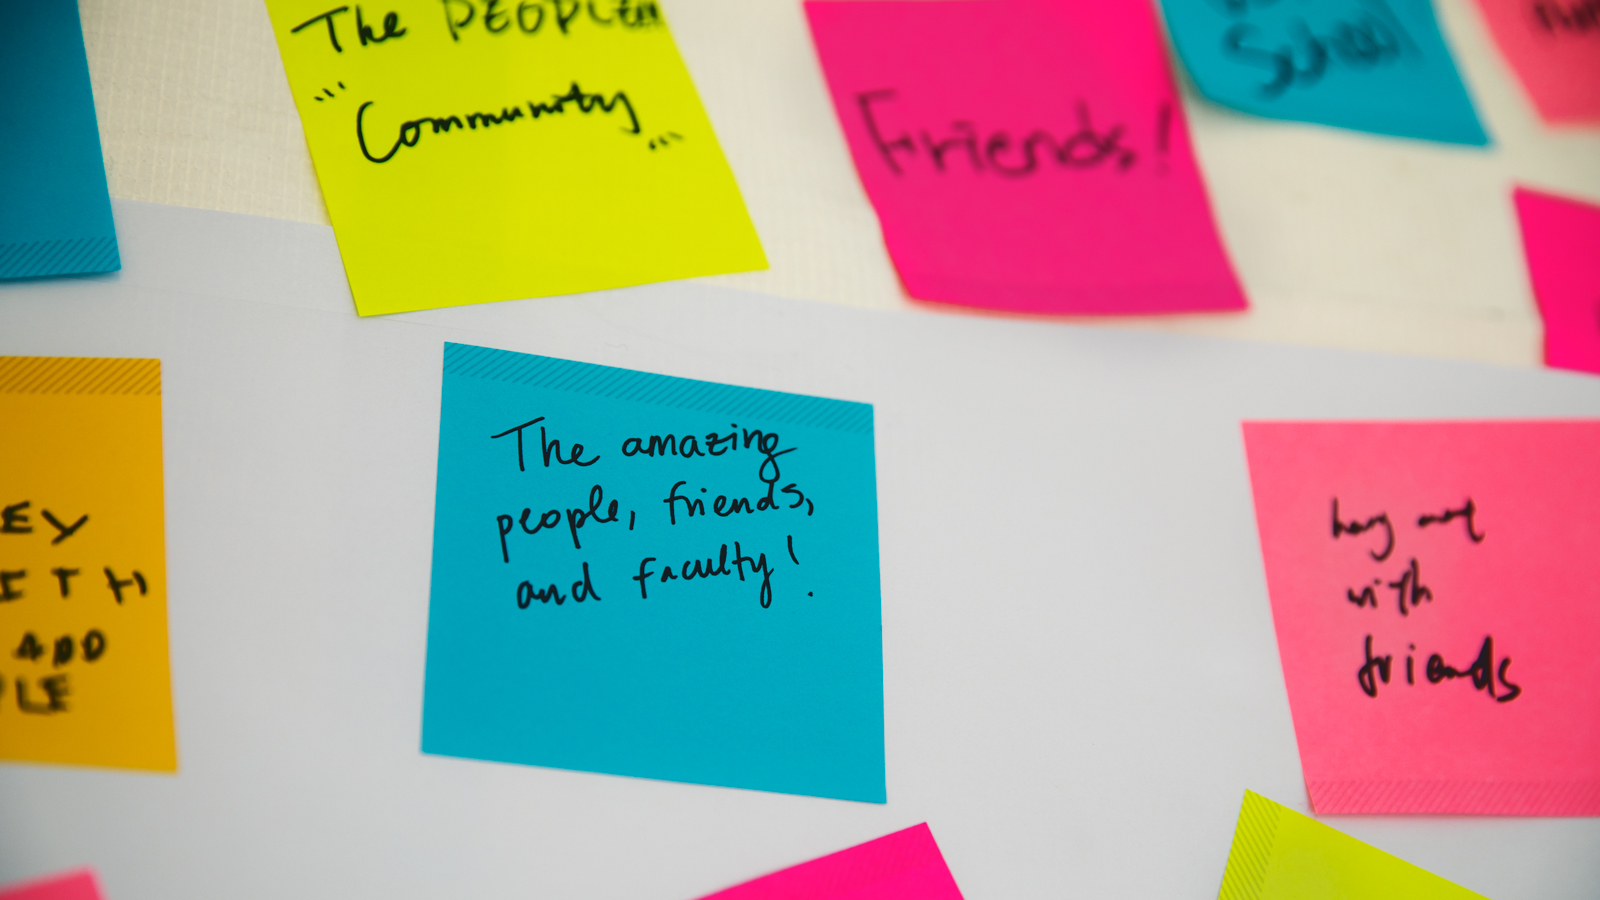 Image of multiple Post-It notes, some of which say: the people and community; friends!; the amazing people, friends, and faculty!; and hang out with friends.